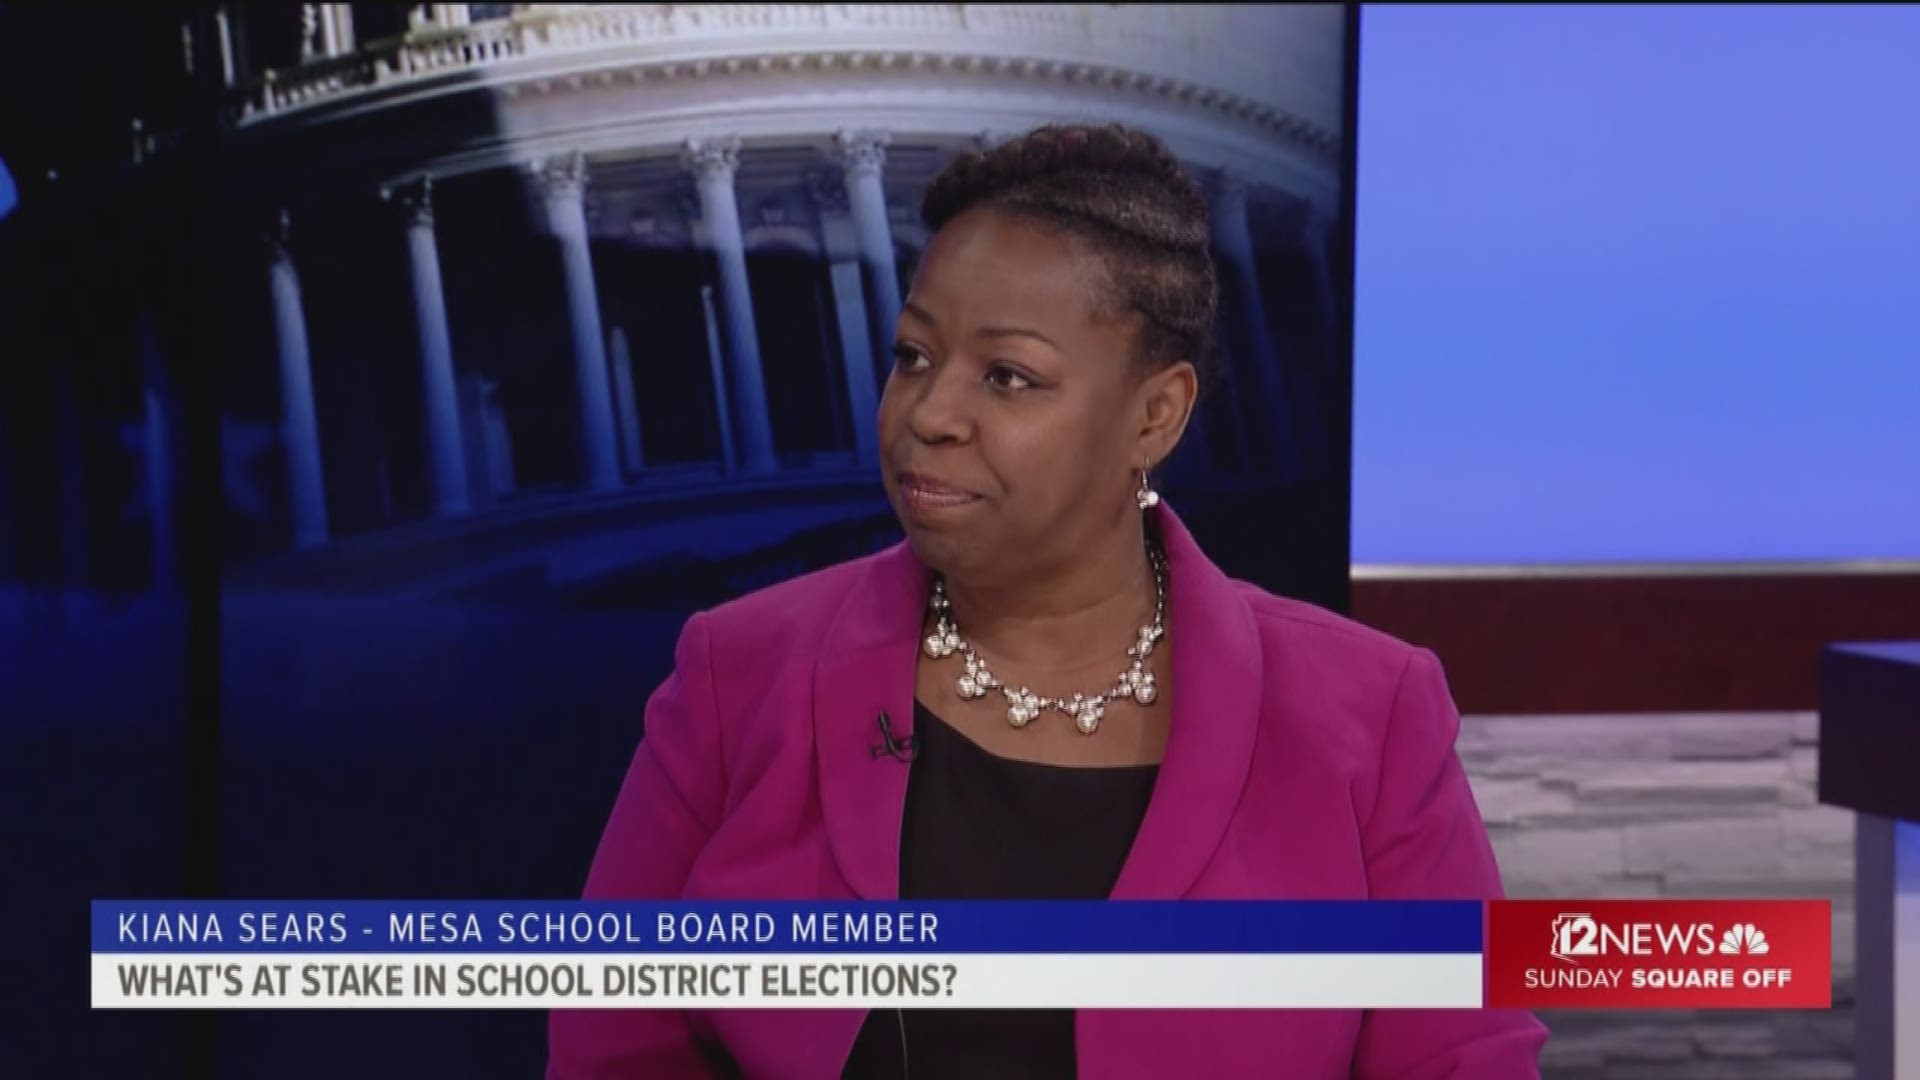 Kiana Sears, a member of the Mesa Public Schools Governing Board, explains why it would be a "tragedy" if voters rejected the funding request by her district.